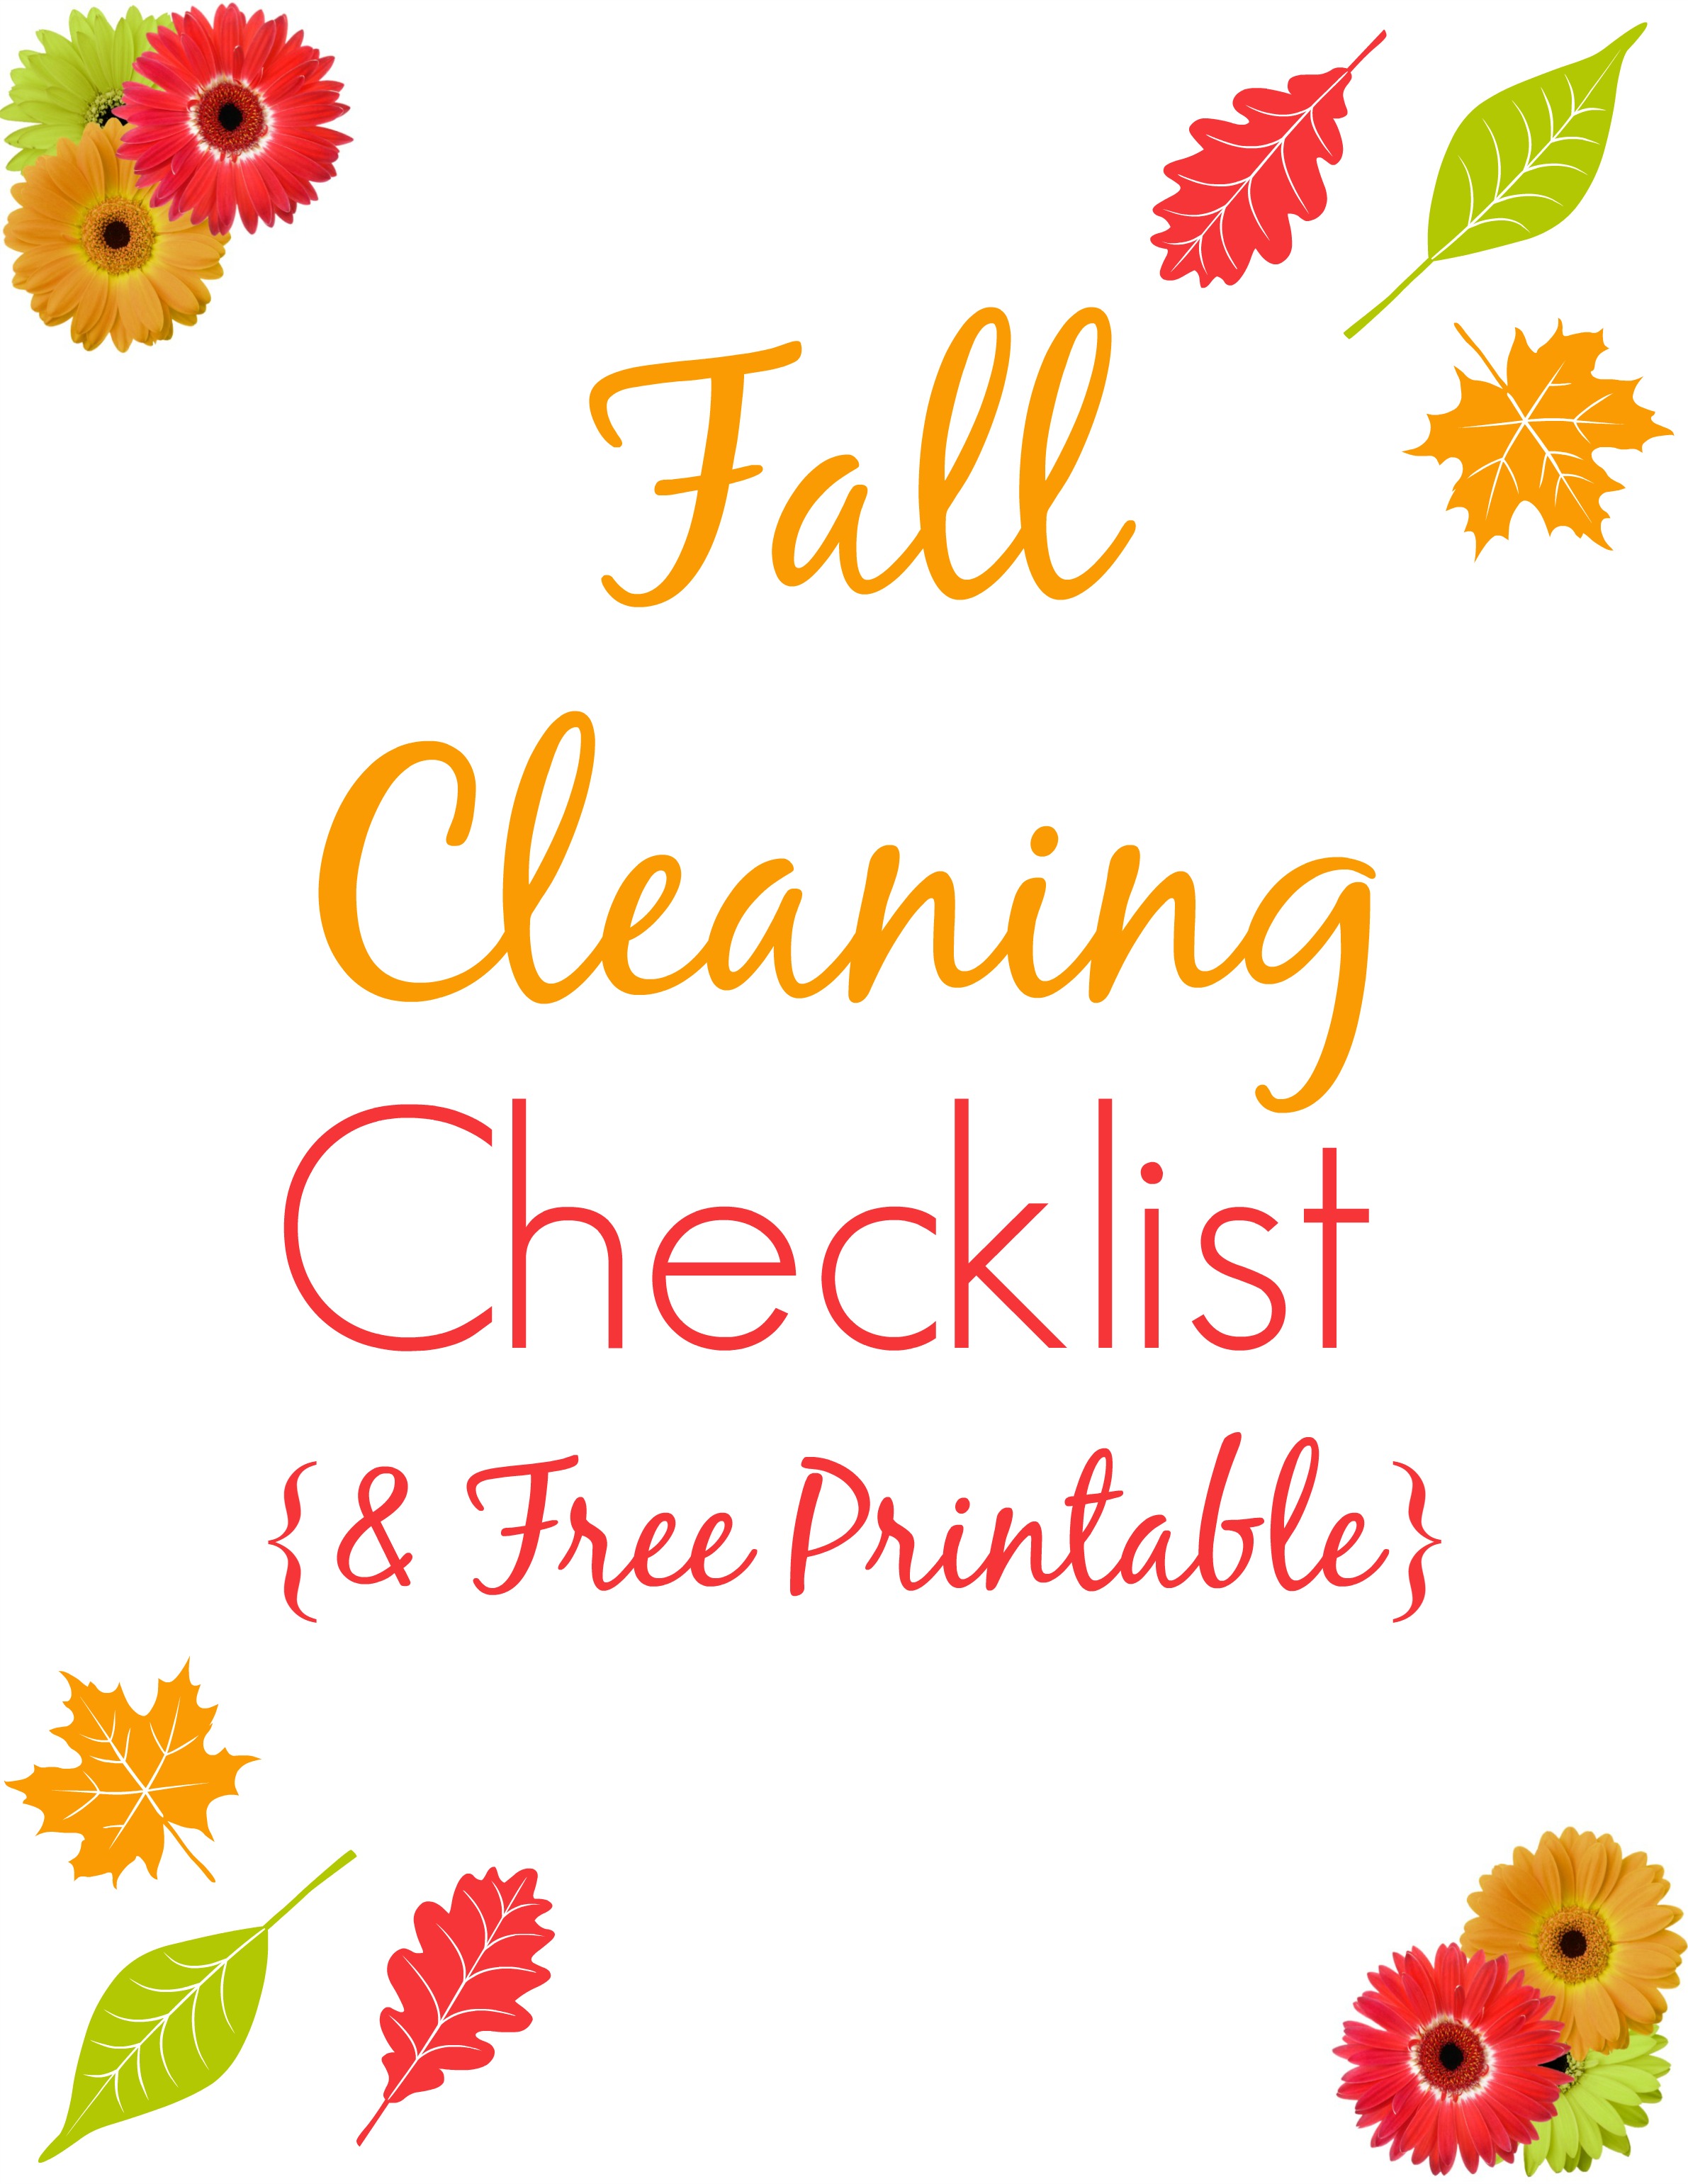 Fall Cleaning Checklist and Printable